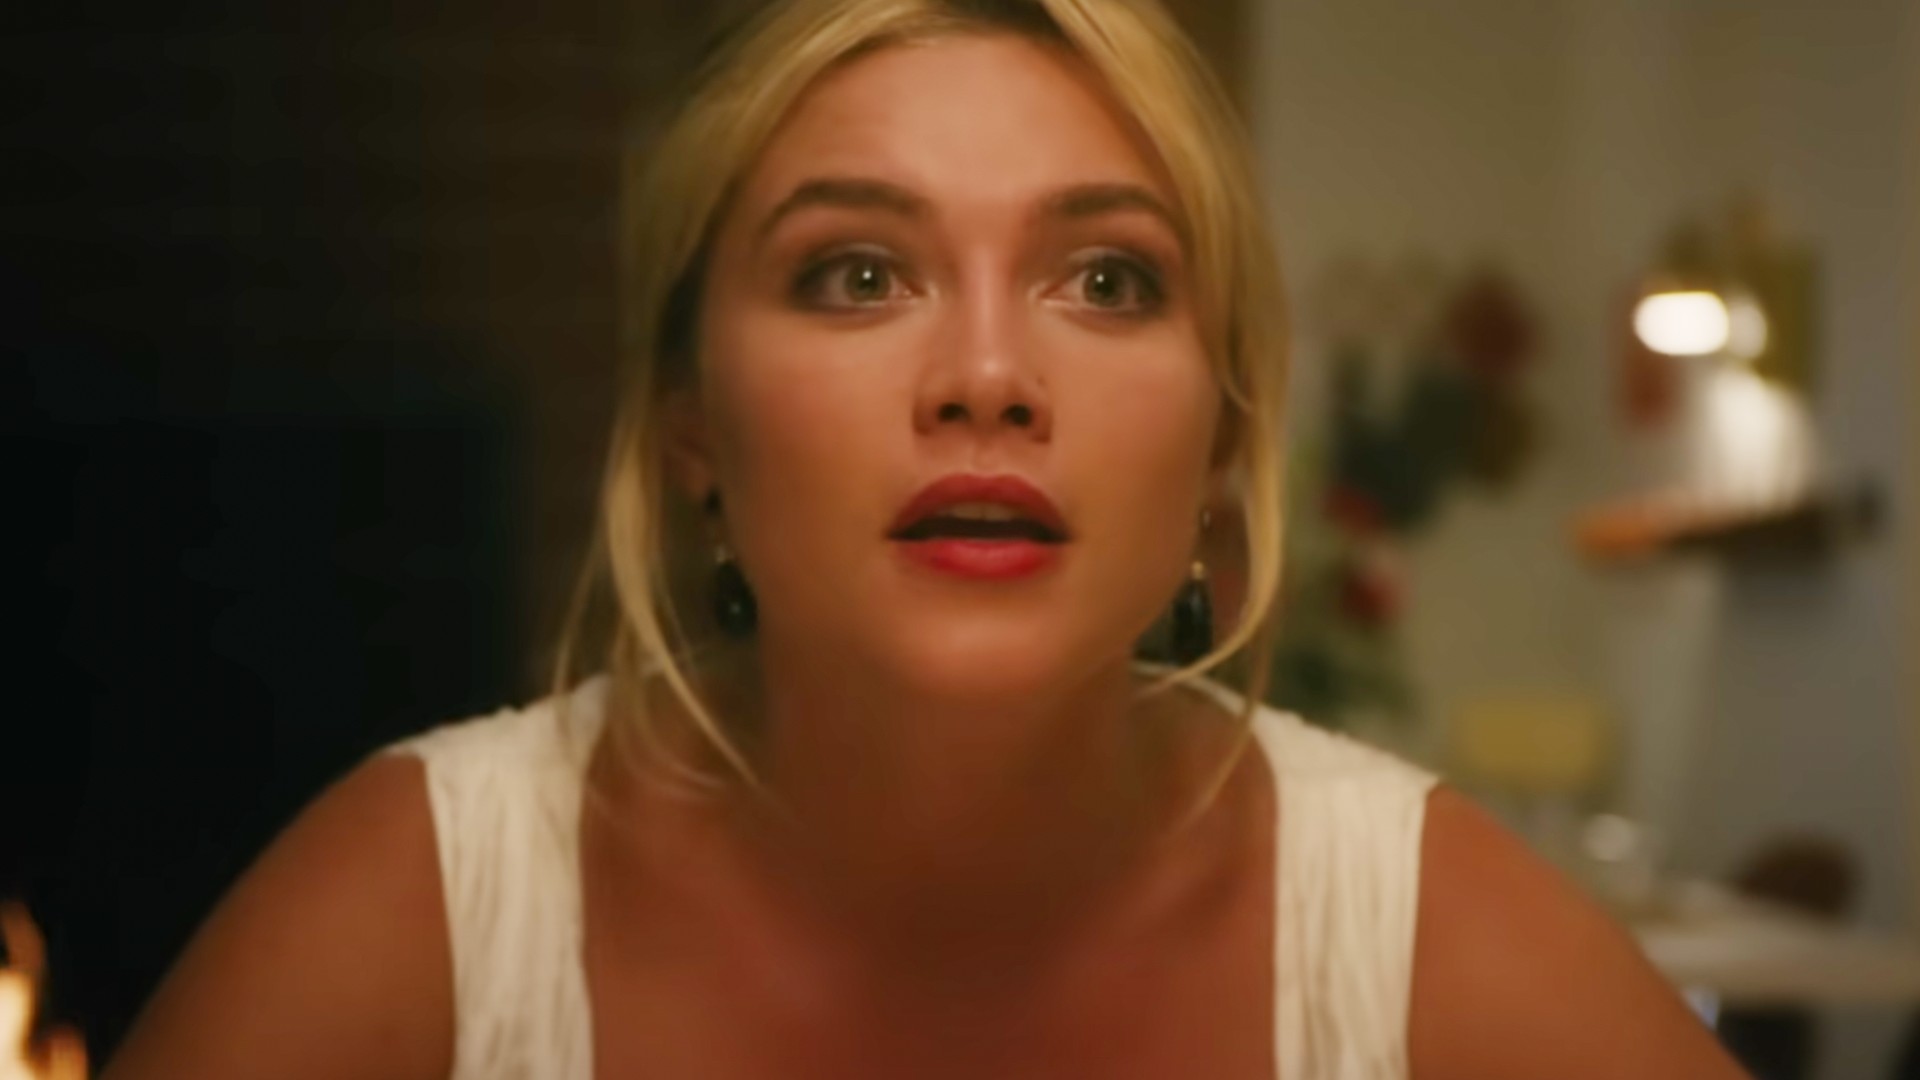 dilip agarwal recommends florence pugh tits pic